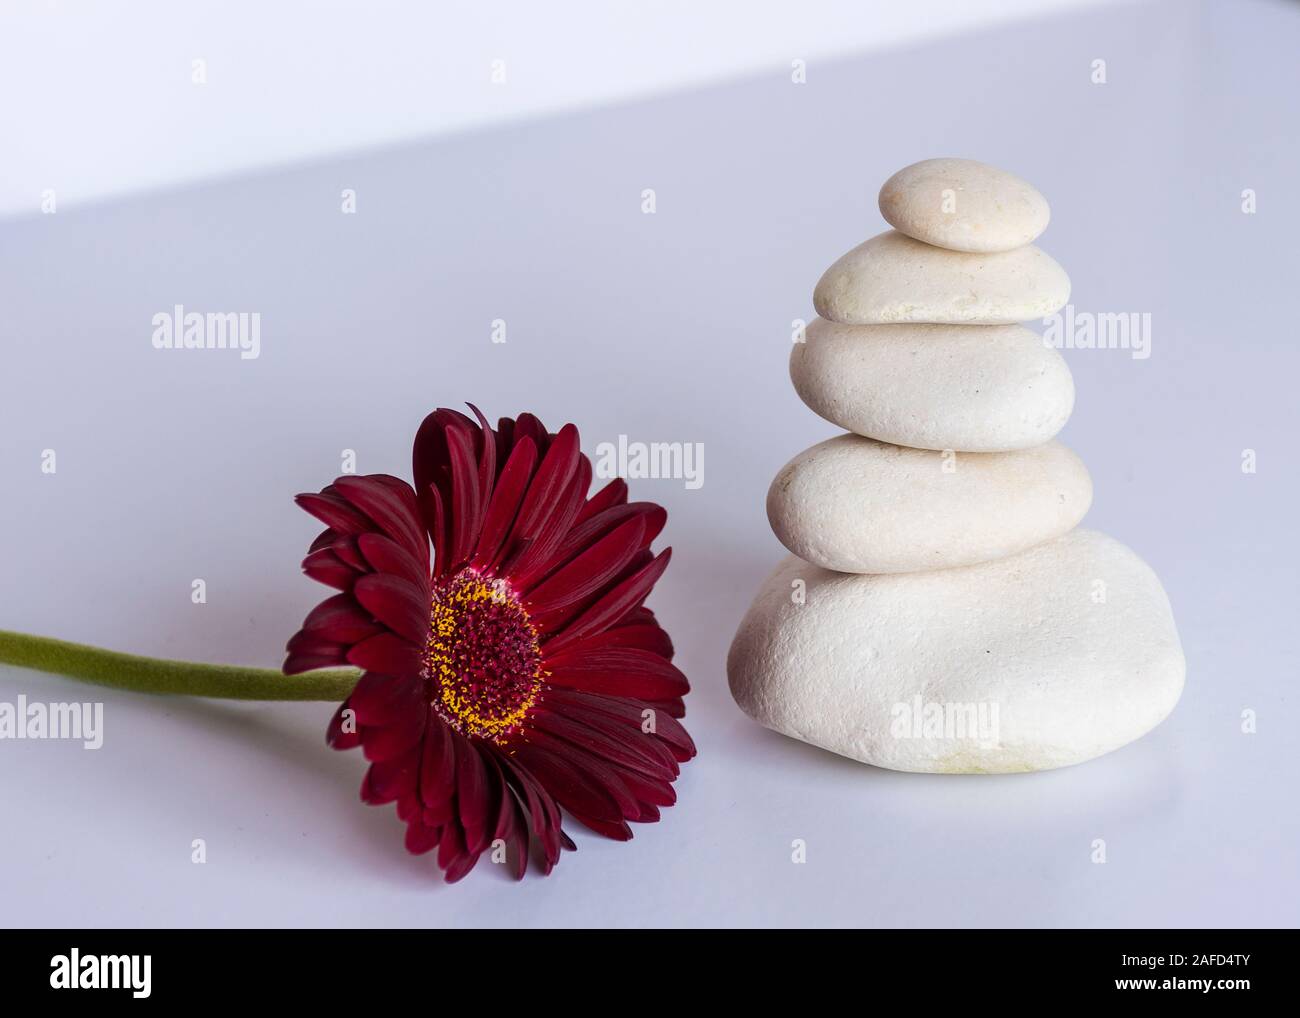 White stone in balance on white background with a red red gerbera daisy, flower, . Meditation, peace, balanced, equilibrium. relaxing image. Yoga Stock Photo